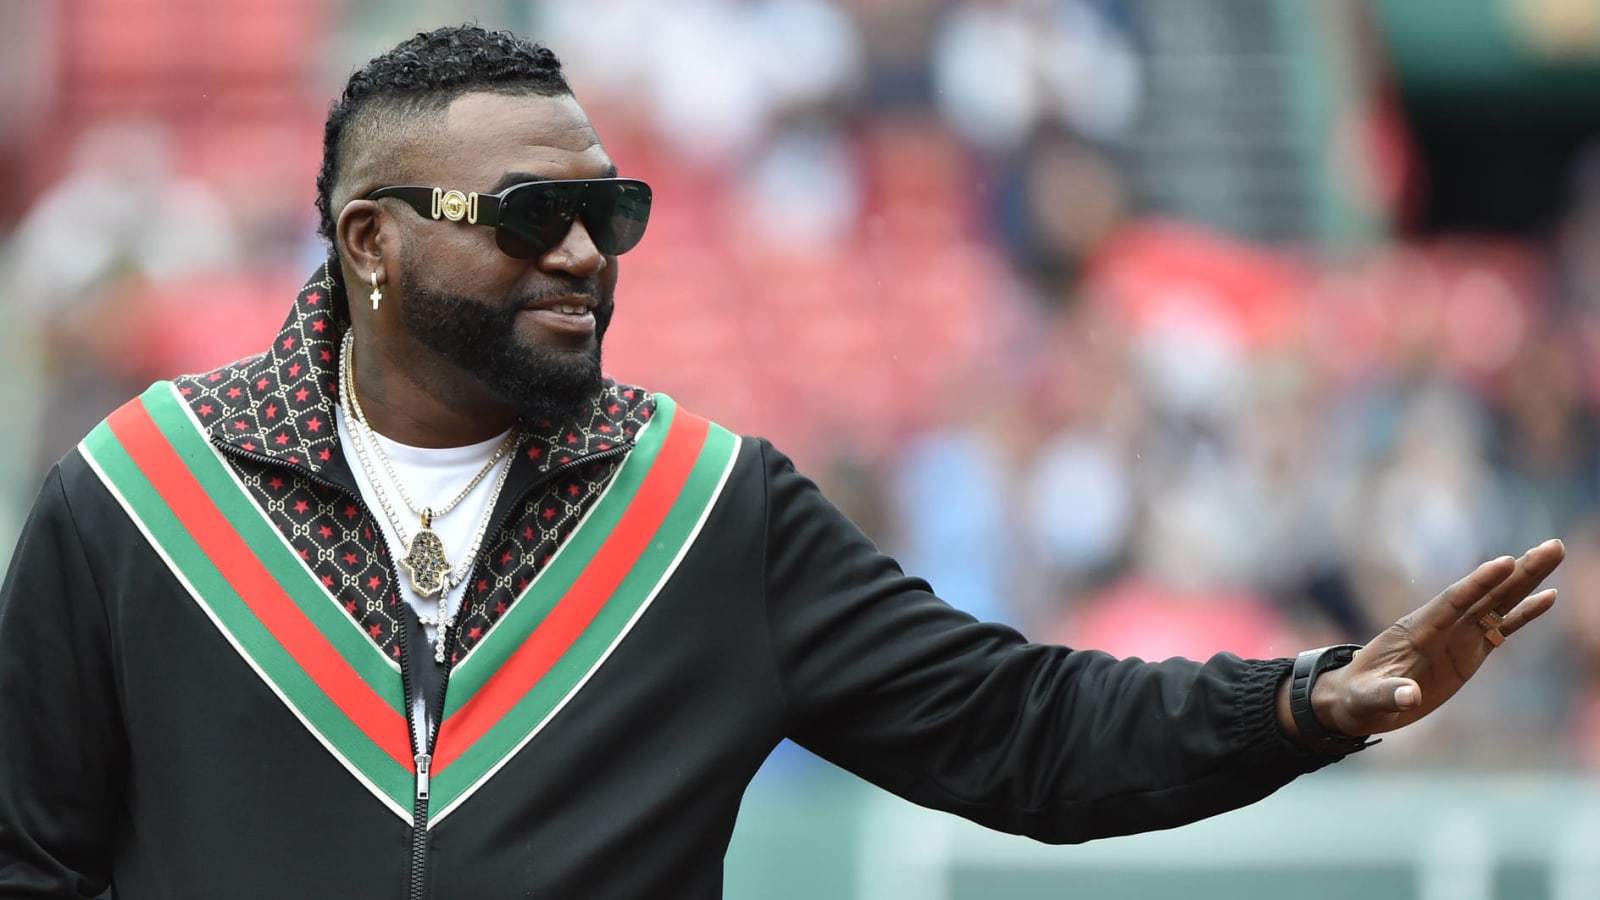 David Ortiz calls out writer over Hall of Fame snub